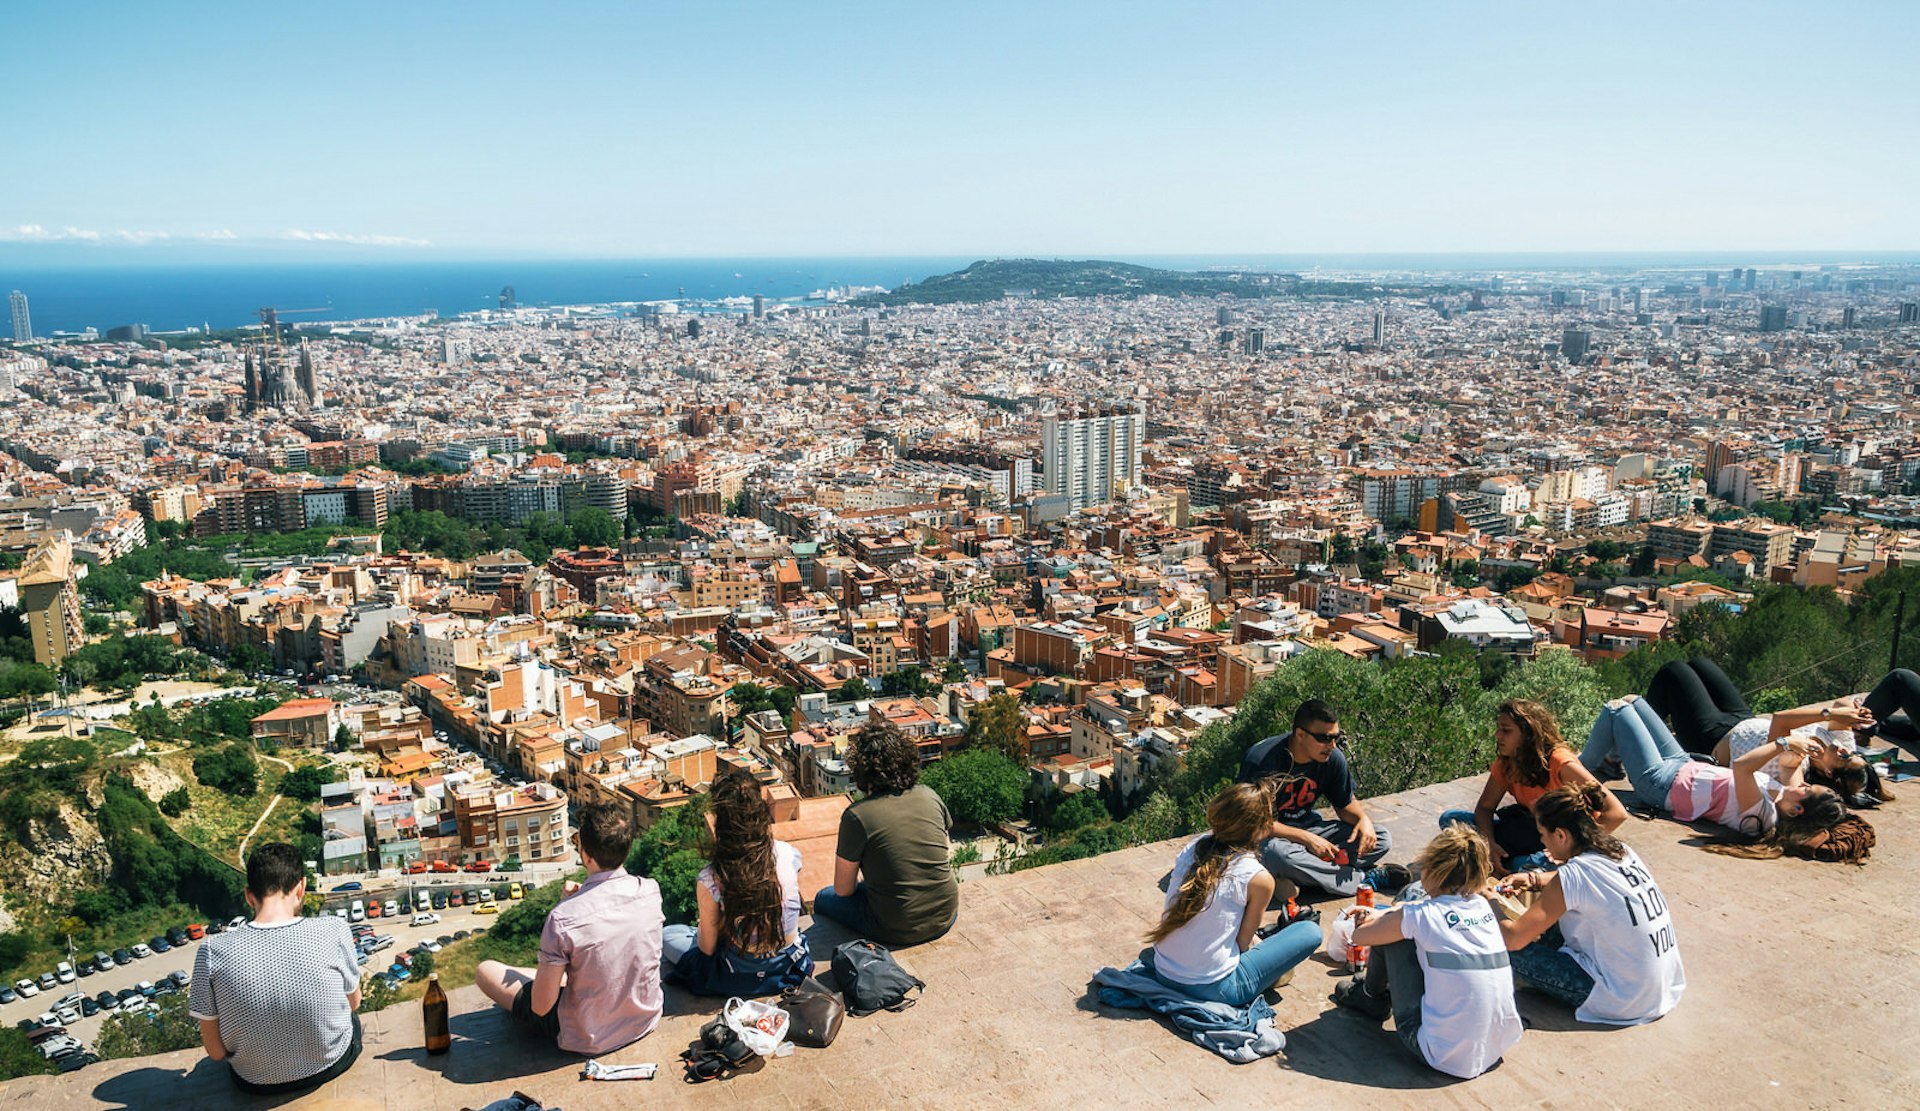 Groups of friends hanging out on the concrete roof of the Bunkers del Carmel, enjoying good weather and the stunning view over Barcelona with the bright blue of the Mediterranean beyond